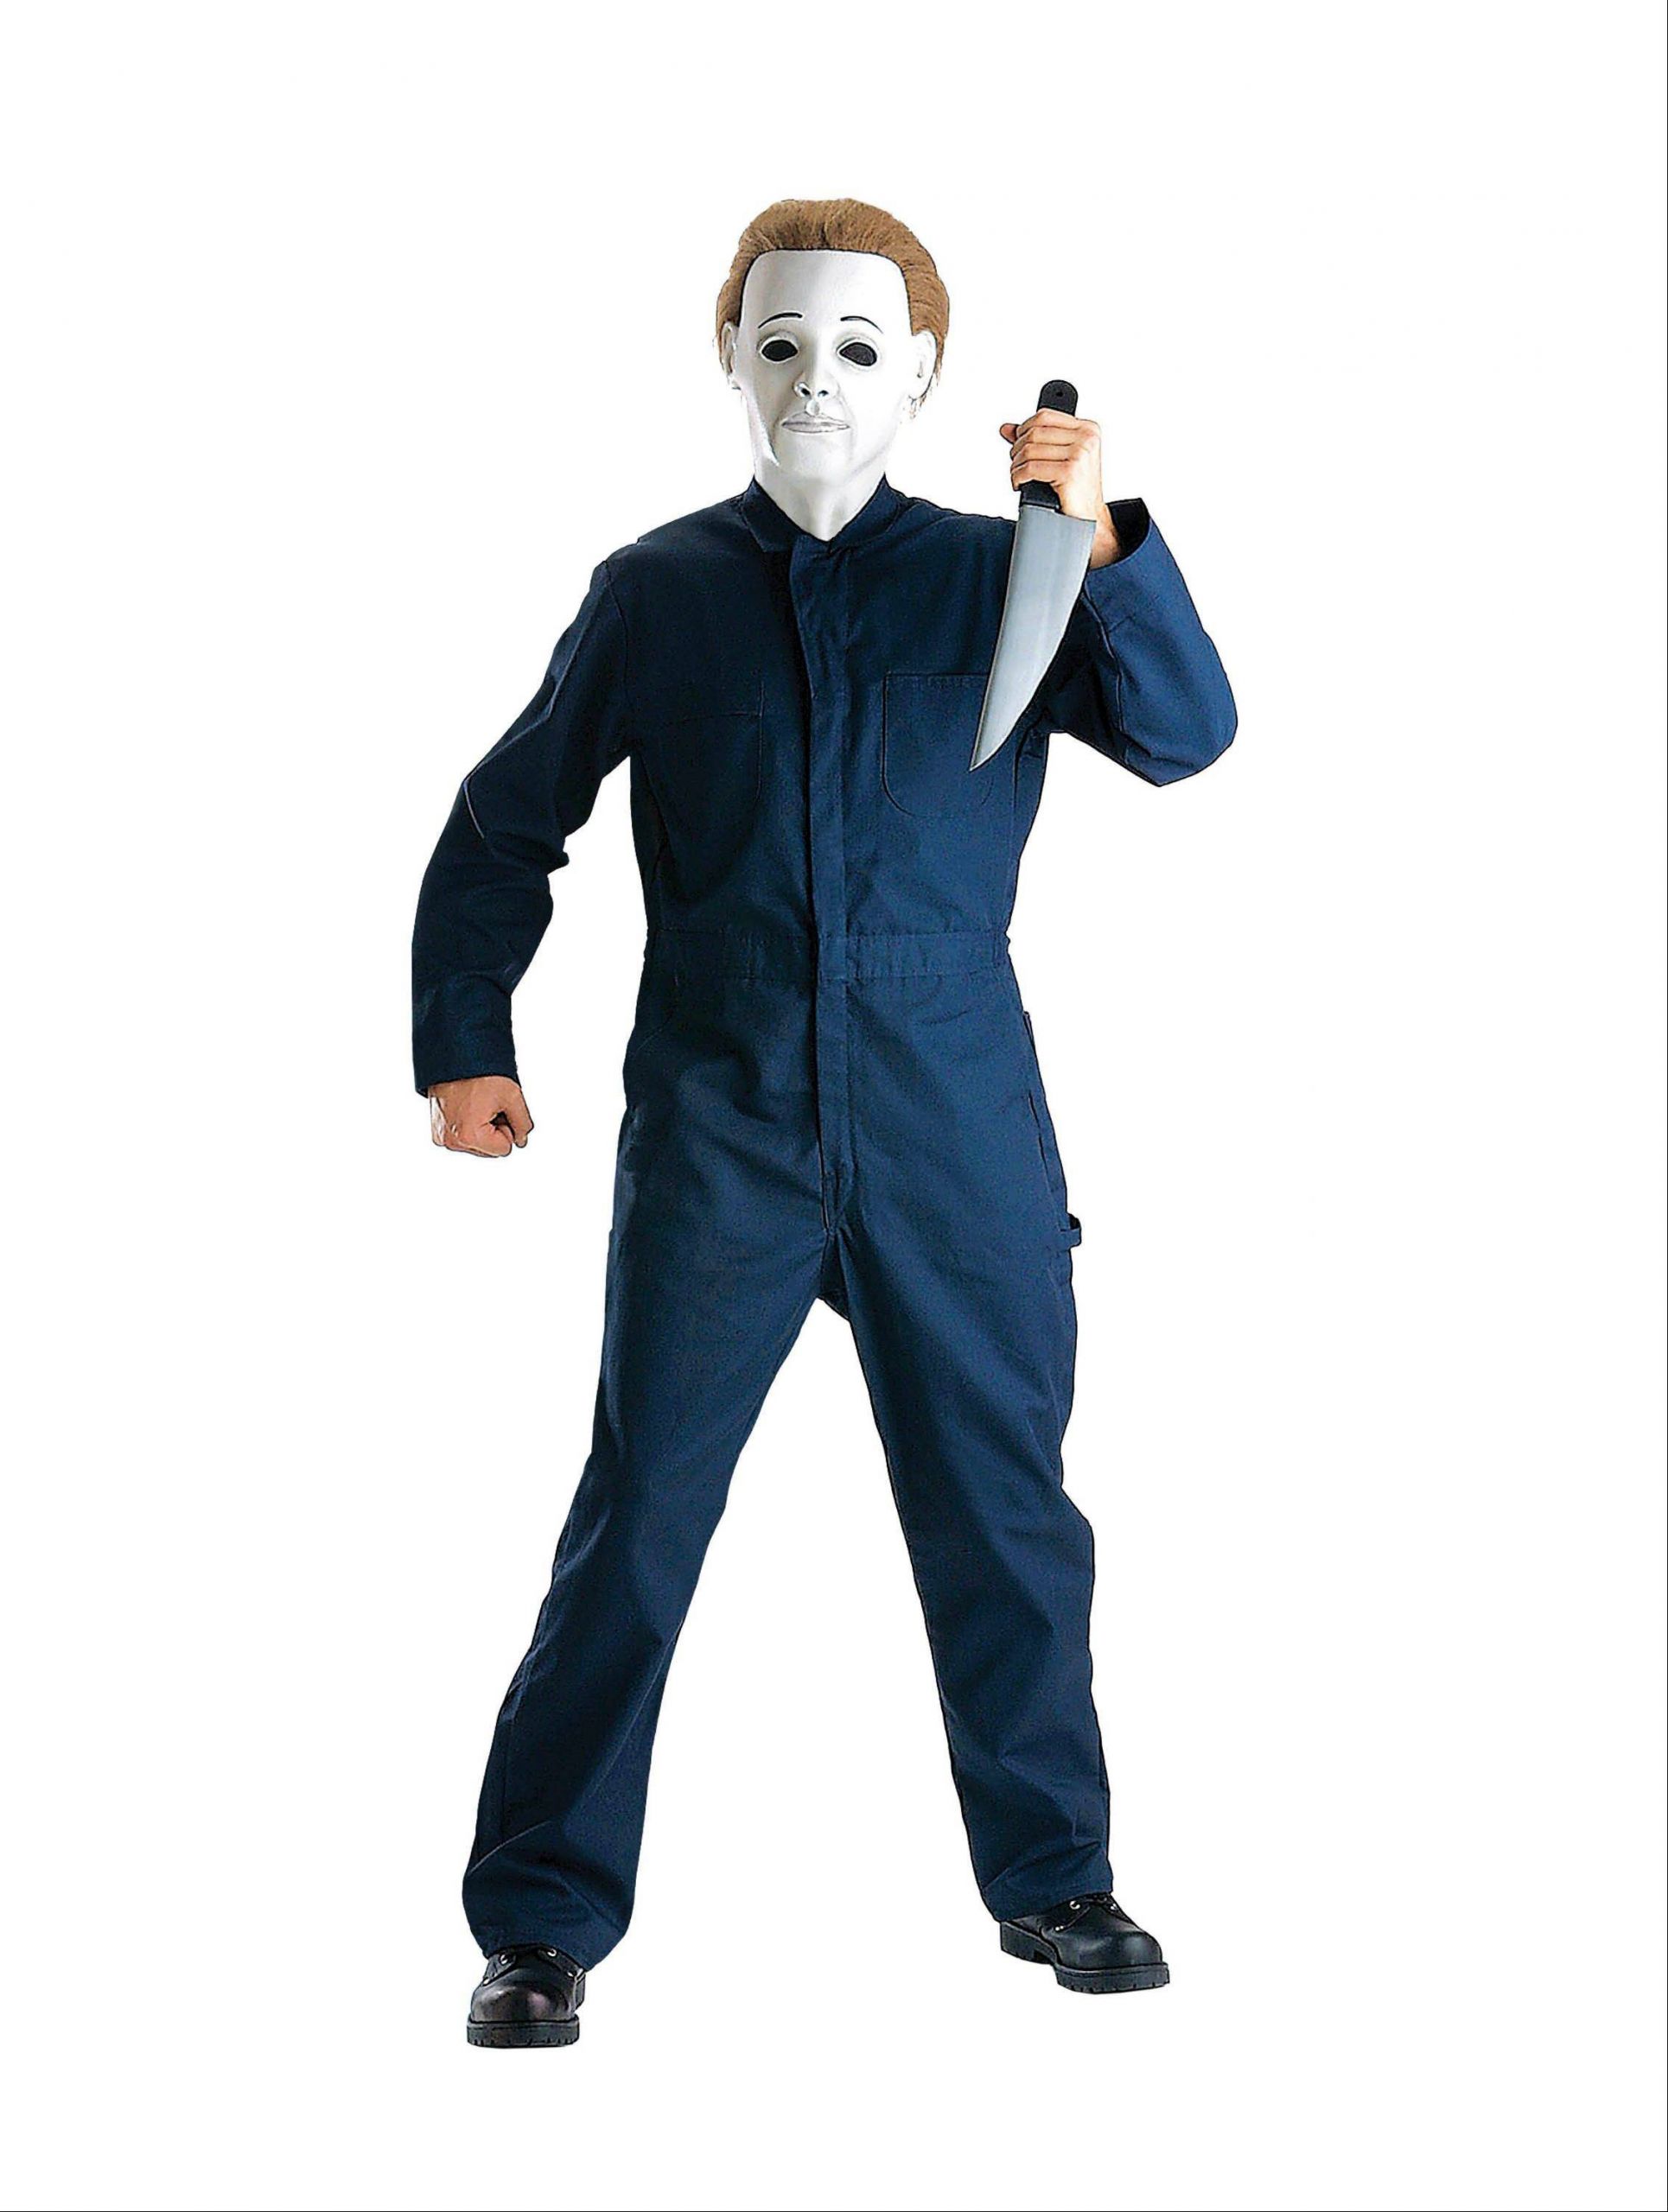 Party City Costumes Kids Boys
 Kindergarten killers Kids costumes gory this year